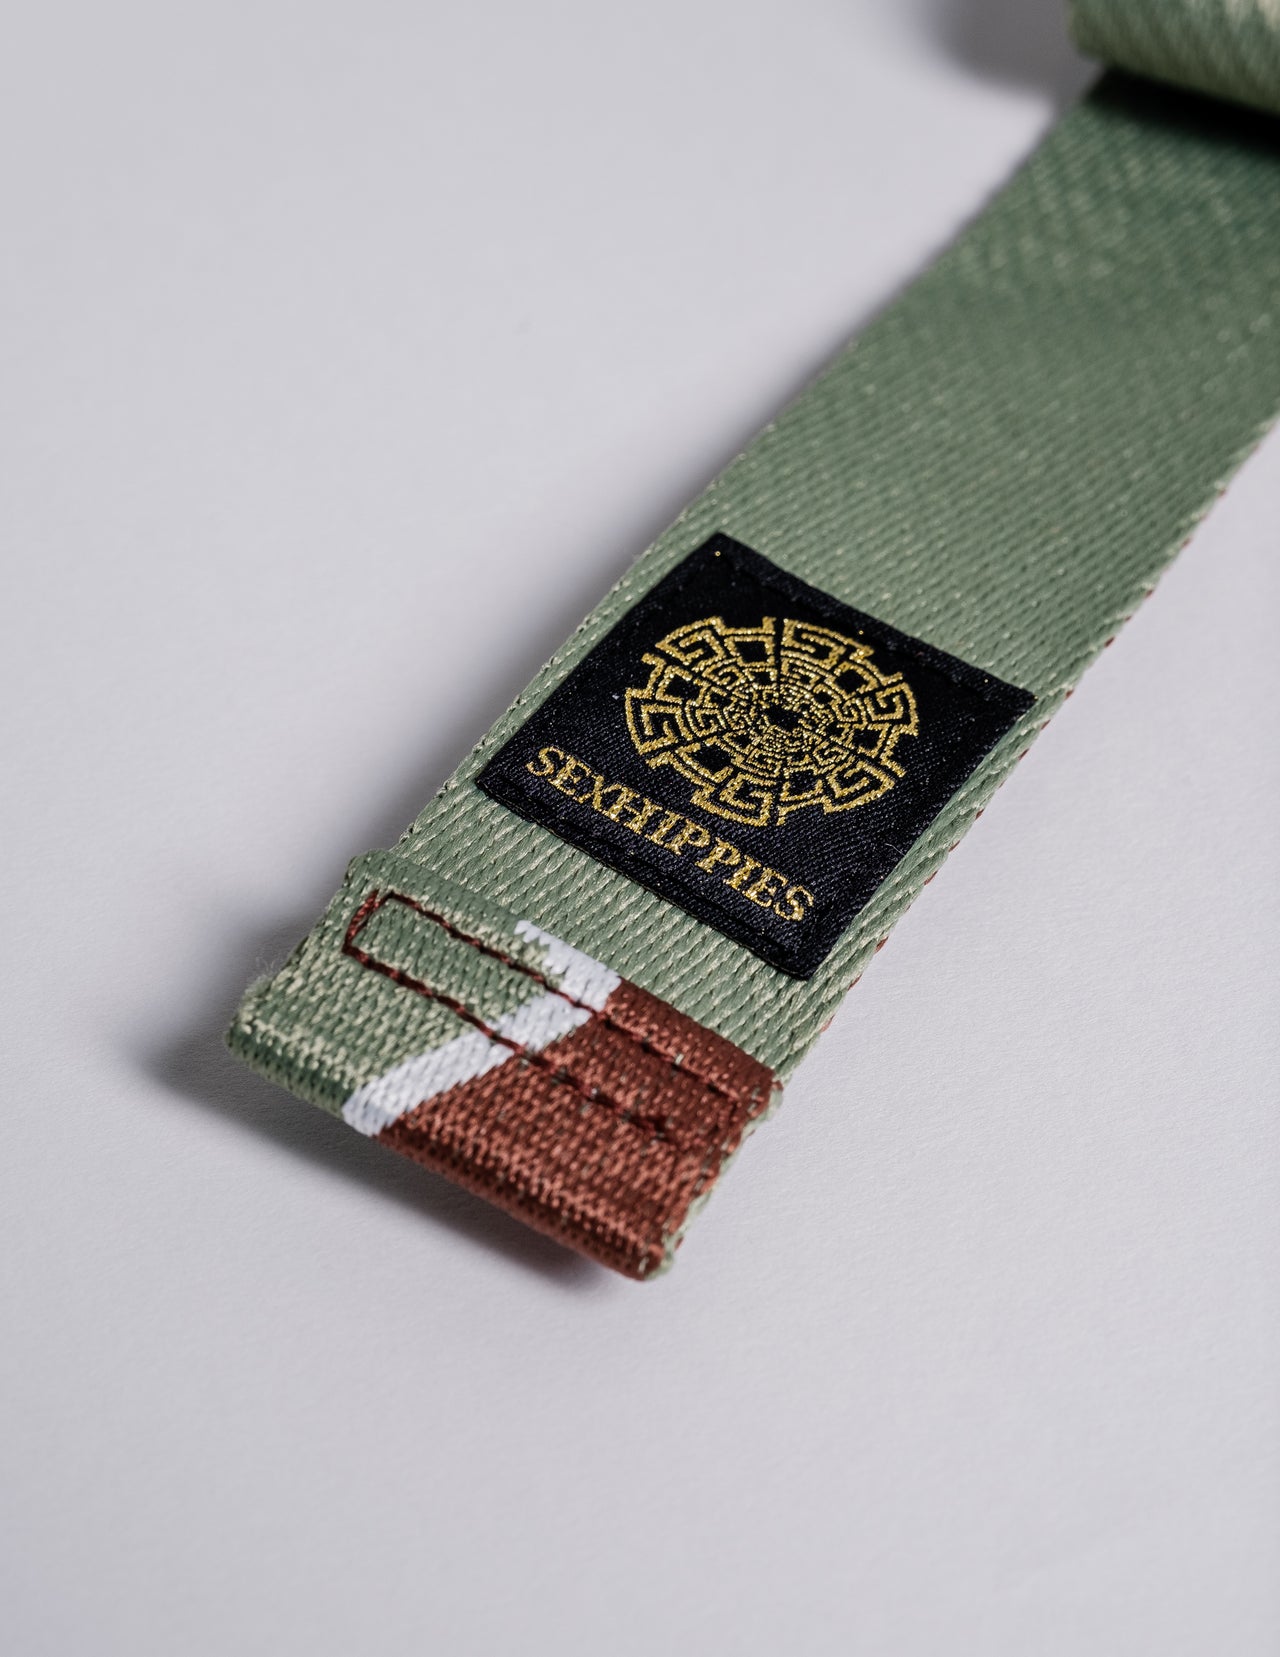 White Cap Belt in Army/Brown